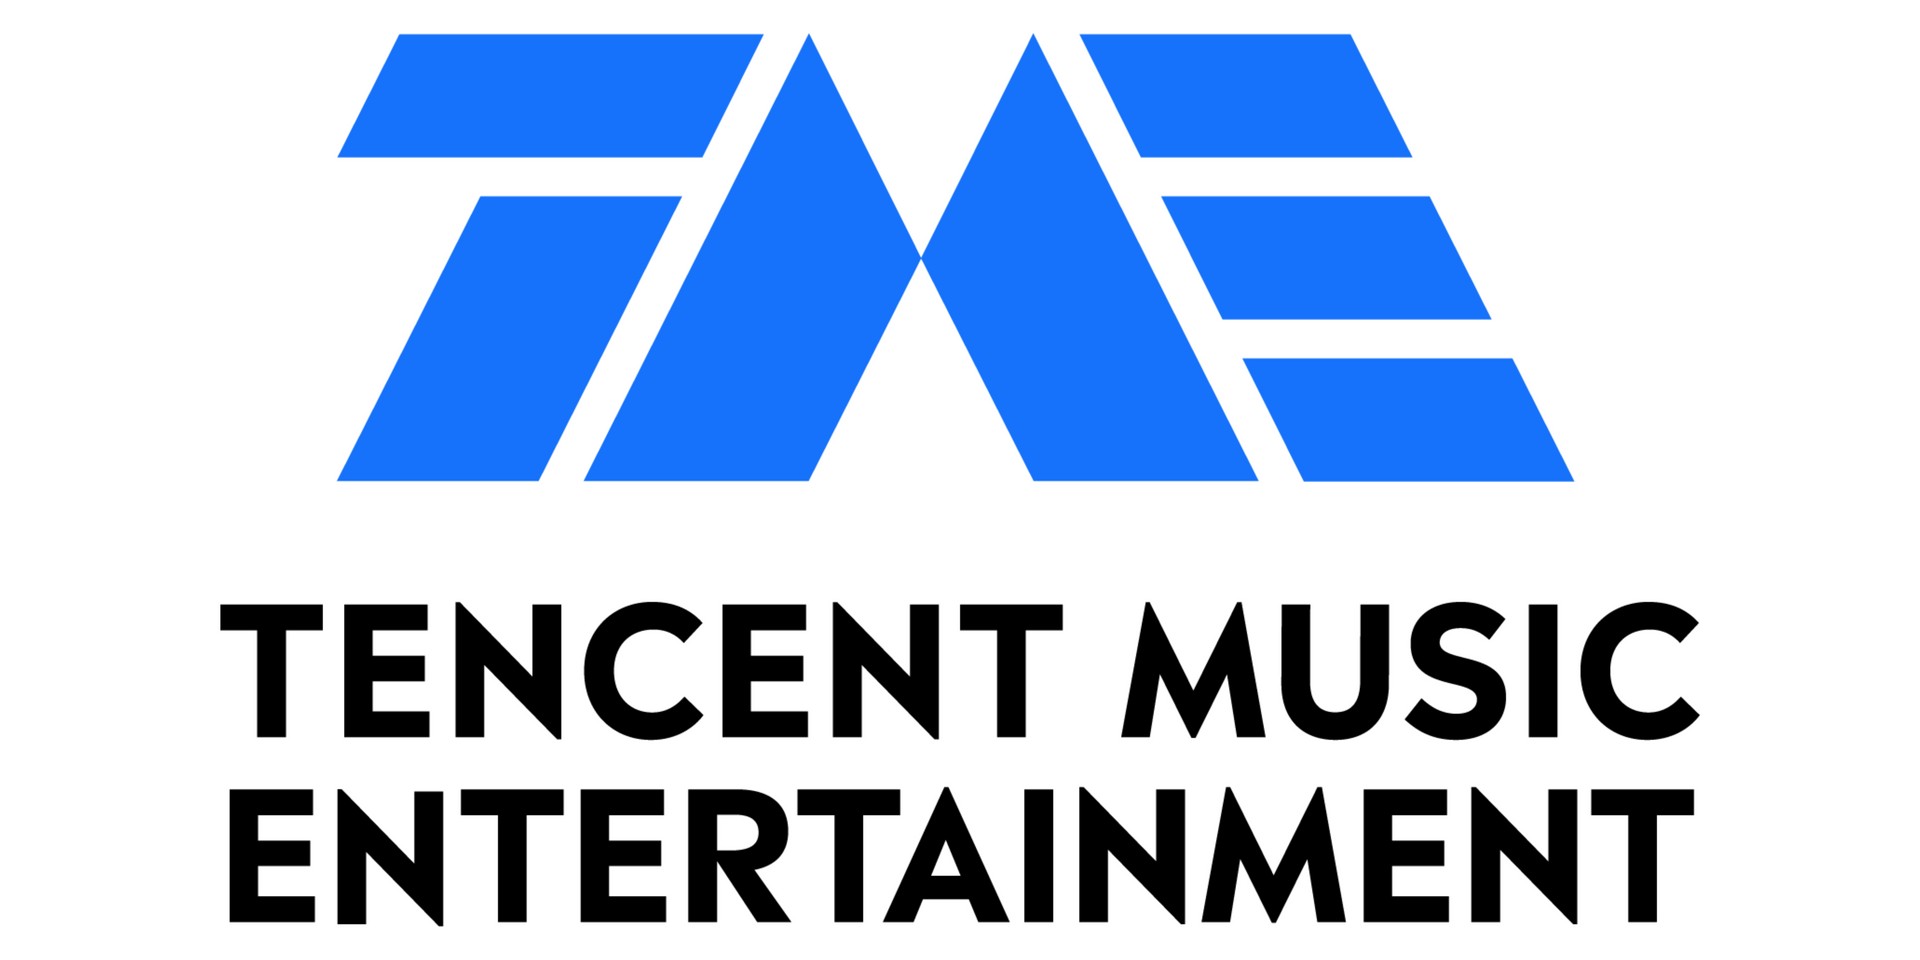 Tencent Music Entertainment launches Producers Alliance to strengthen music production quality in China